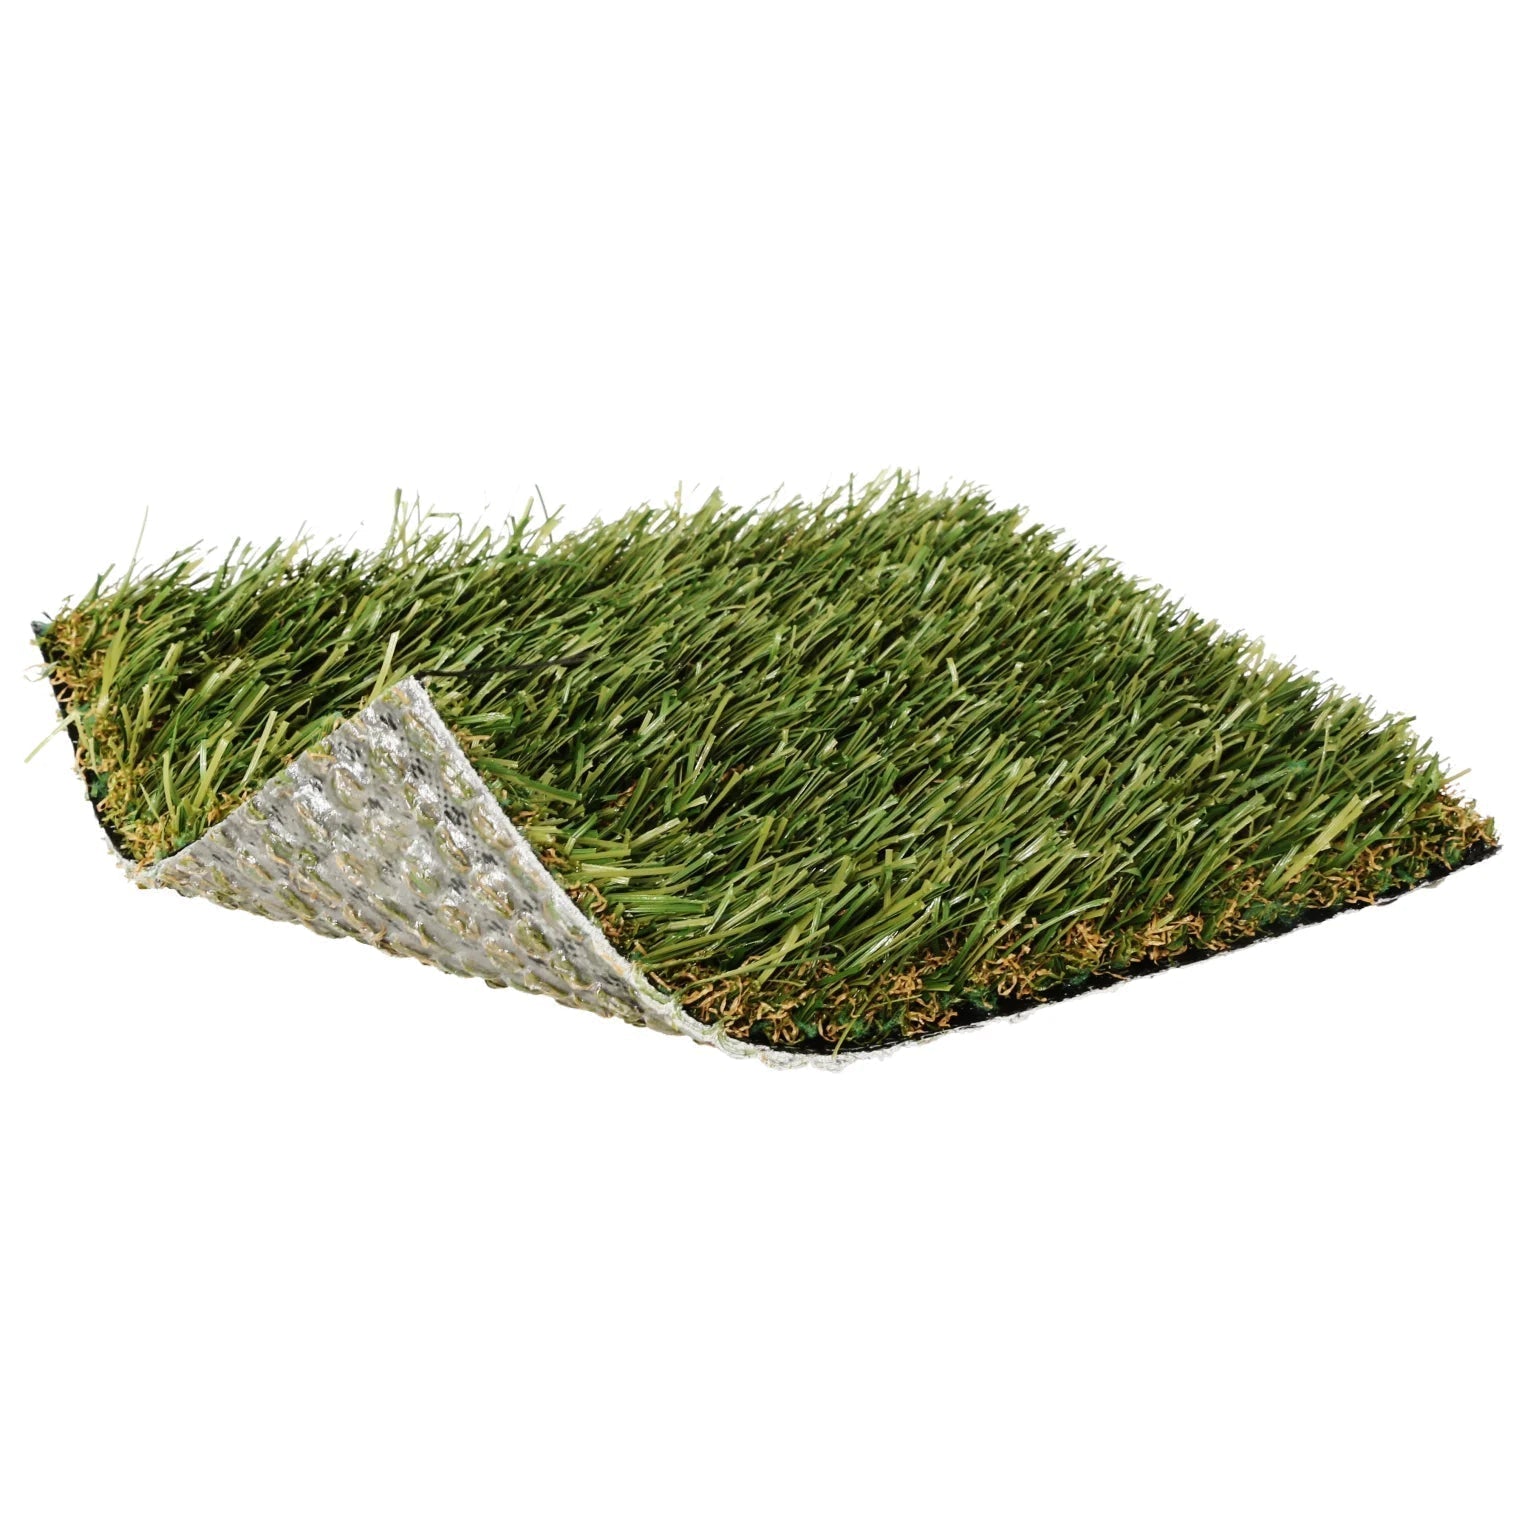 Catalina-Synthetic Grass Turf-GrassTex-G-Field/Olive-Silverback- Perforated-1 ½"-KNB Mills